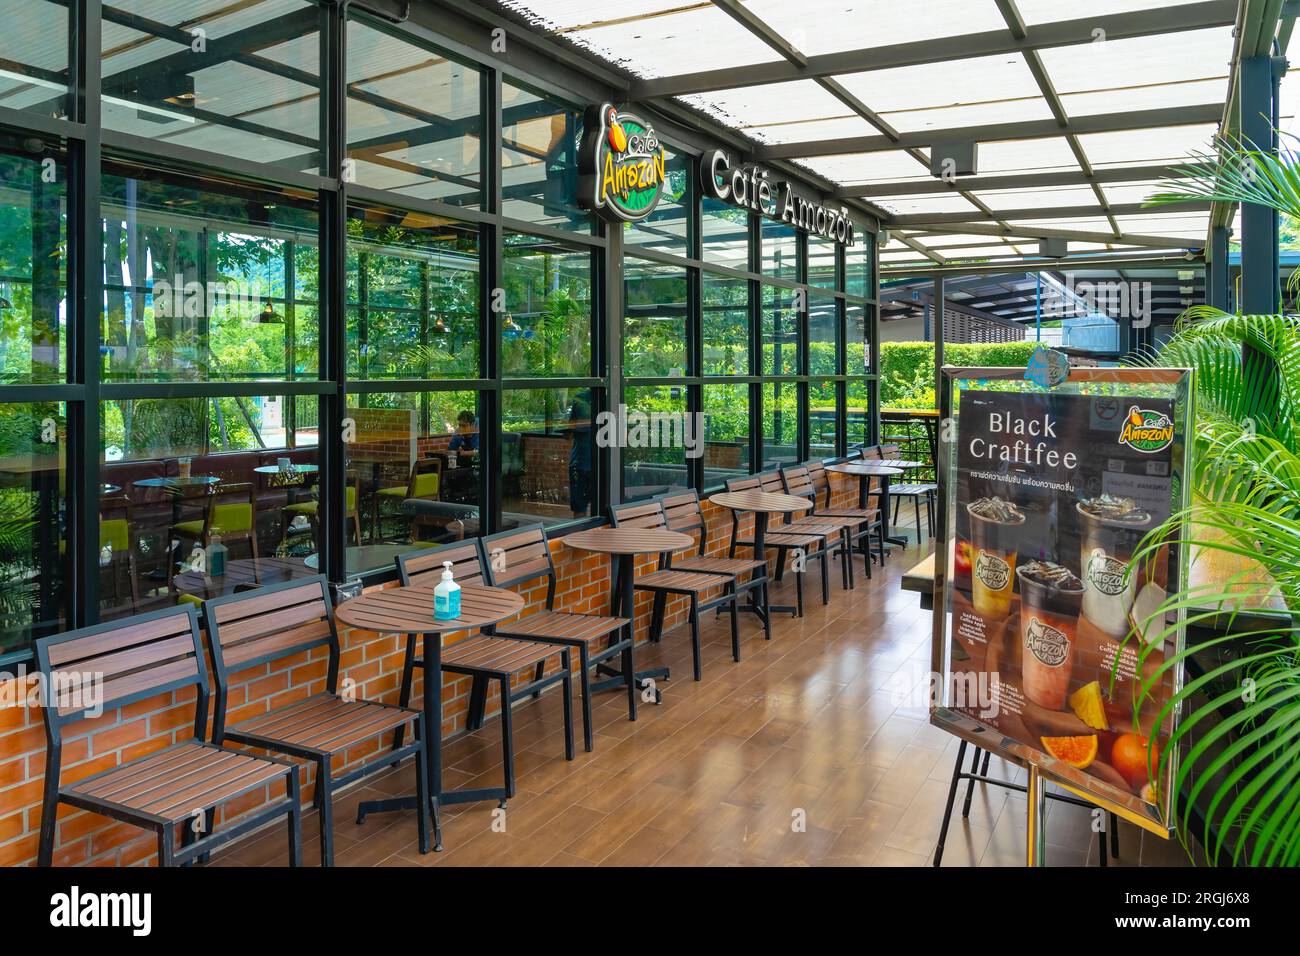 KANCHANABURI, THAILAND-JULY 6,2023 : Beautiful exterior view of Cafe Amazon coffee shop with nature environment at PTT Oil station. Cafe Amazon is a f Stock Photo